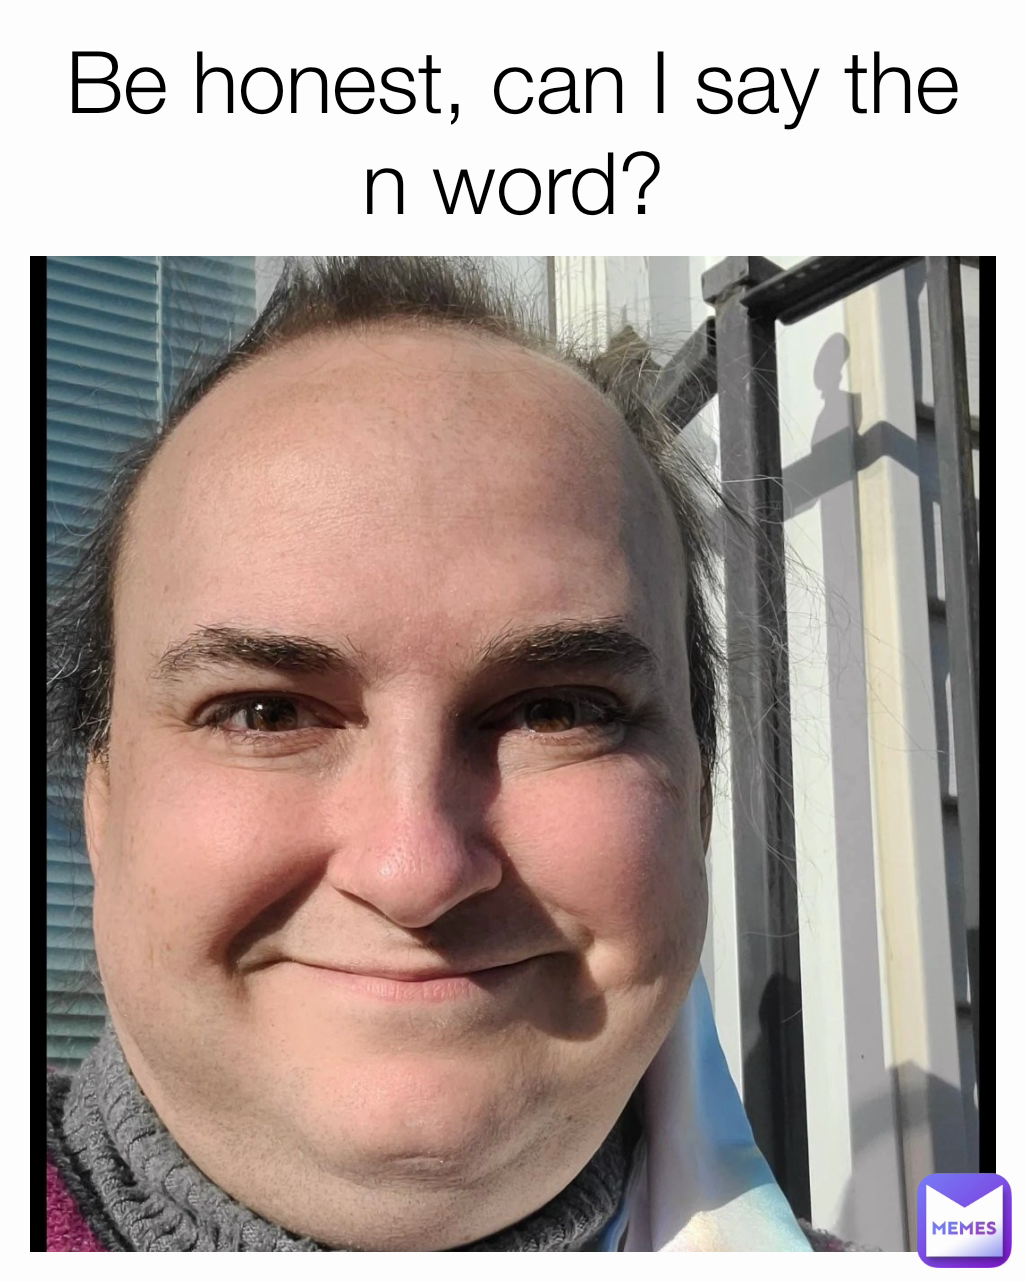 Be honest, can I say the n word?